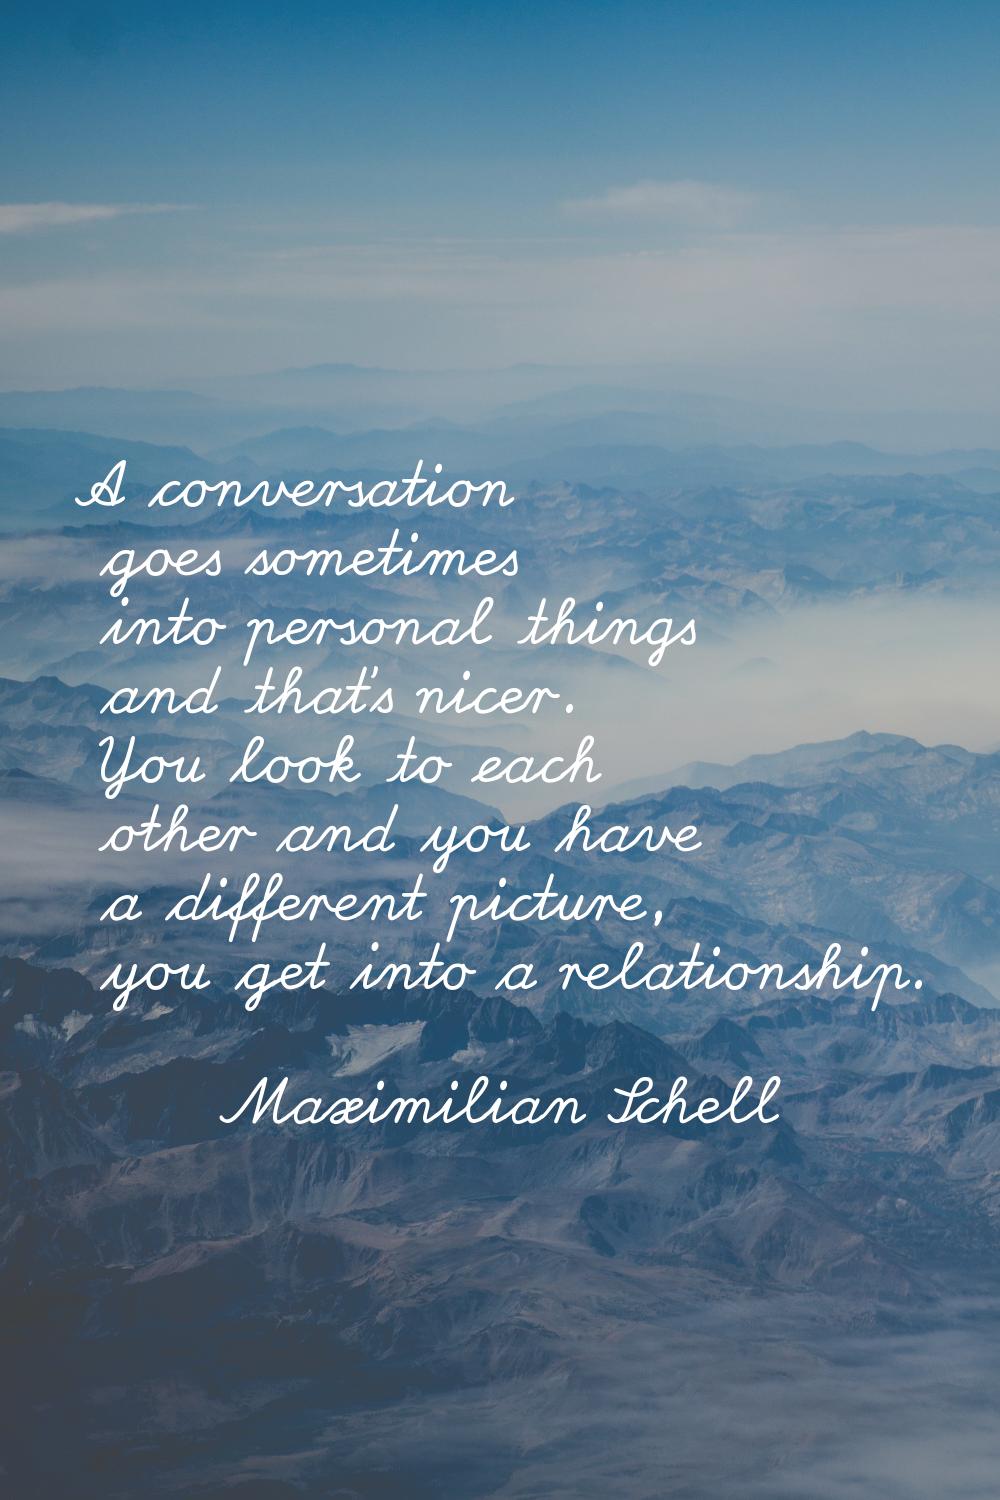 A conversation goes sometimes into personal things and that's nicer. You look to each other and you